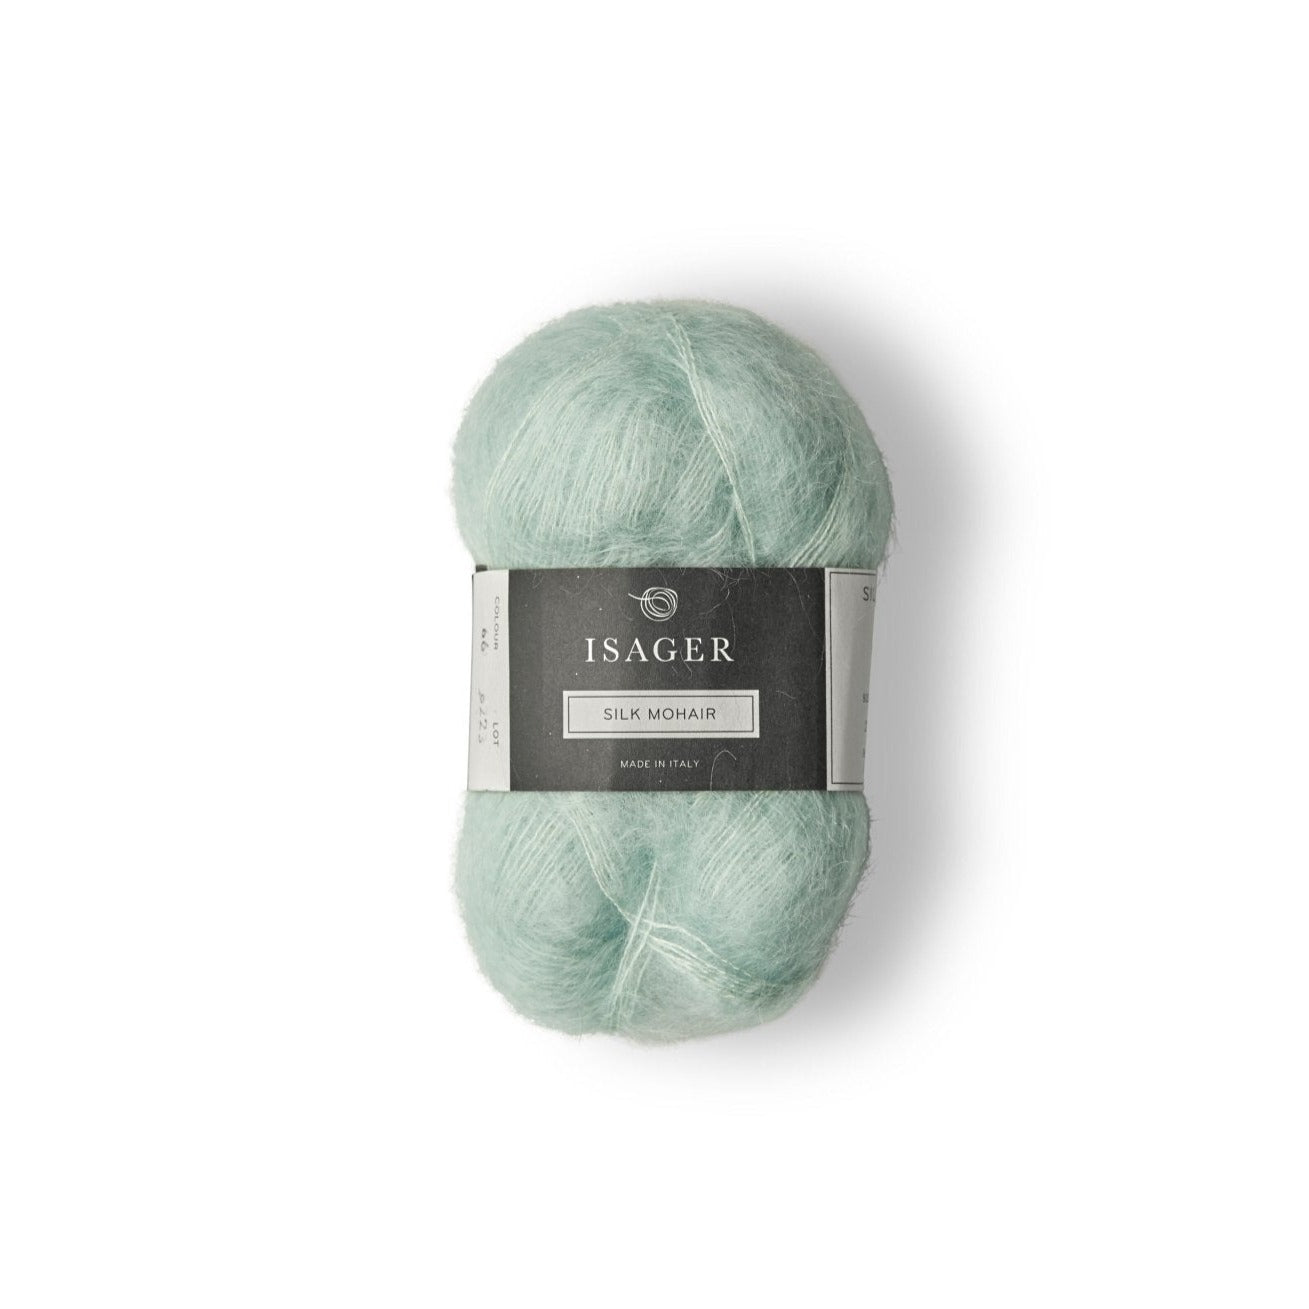 Isager Silk Mohair - 66 - 2 Ply - Isager - The Little Yarn Store